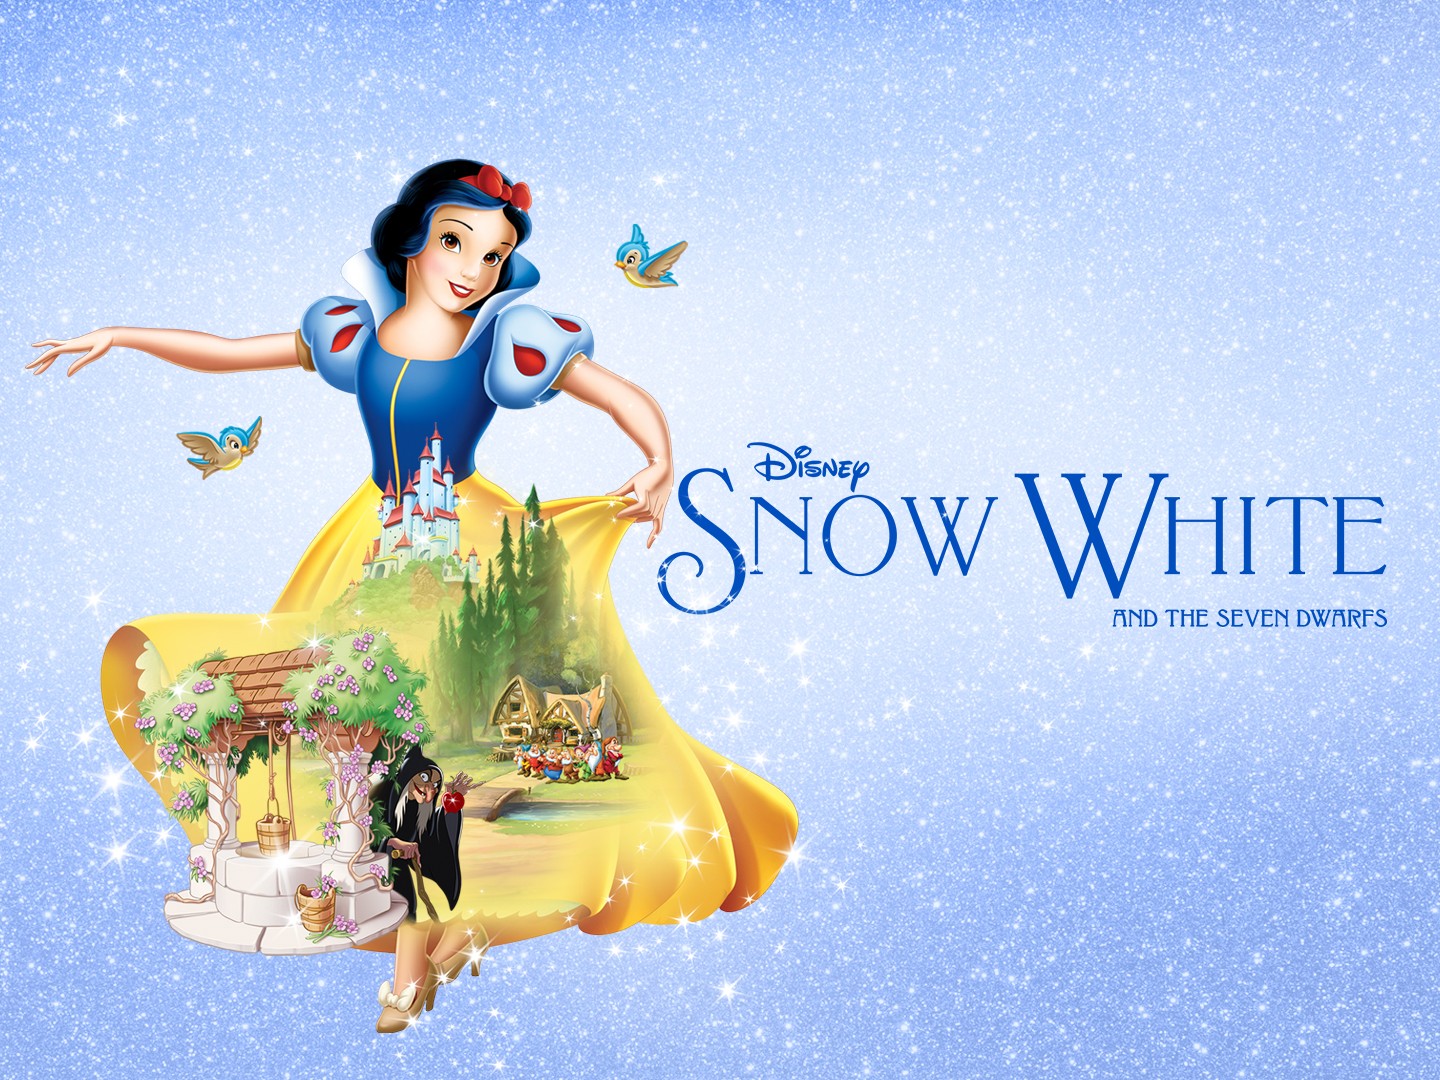  Snow White and the Seven Dwarfs [4K UHD] : Adriana Caselotti,  Harry Stockwell, Lucille LaVerne, Moroni Olsen, Billy Gilbert, Pinto  Colvig, Otis Harlan, Scotty Mattraw, Roy Atwell, David Hand, Ted Sears